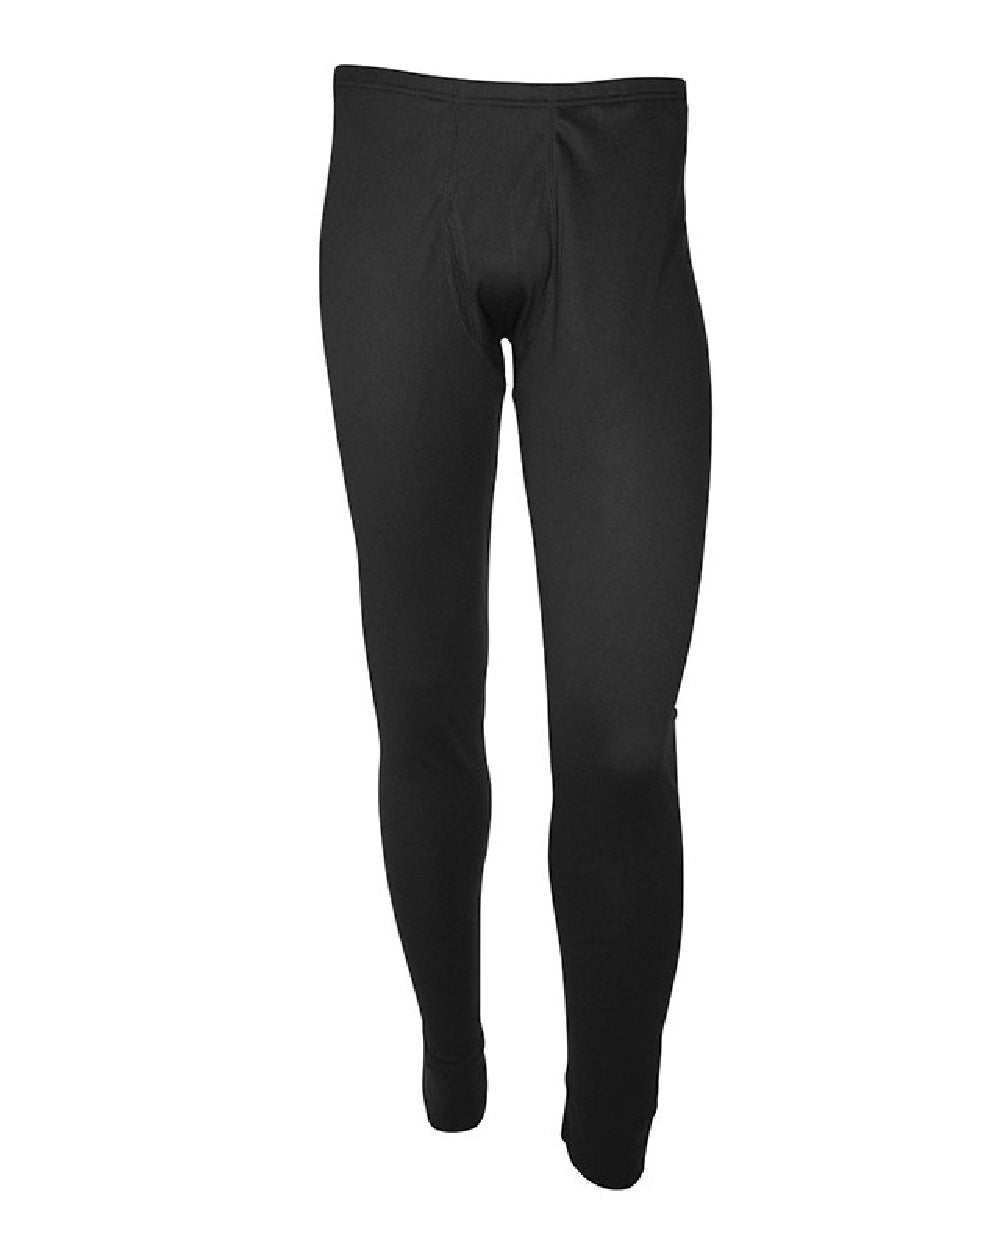 Percussion Megadry Long Johns in Black 